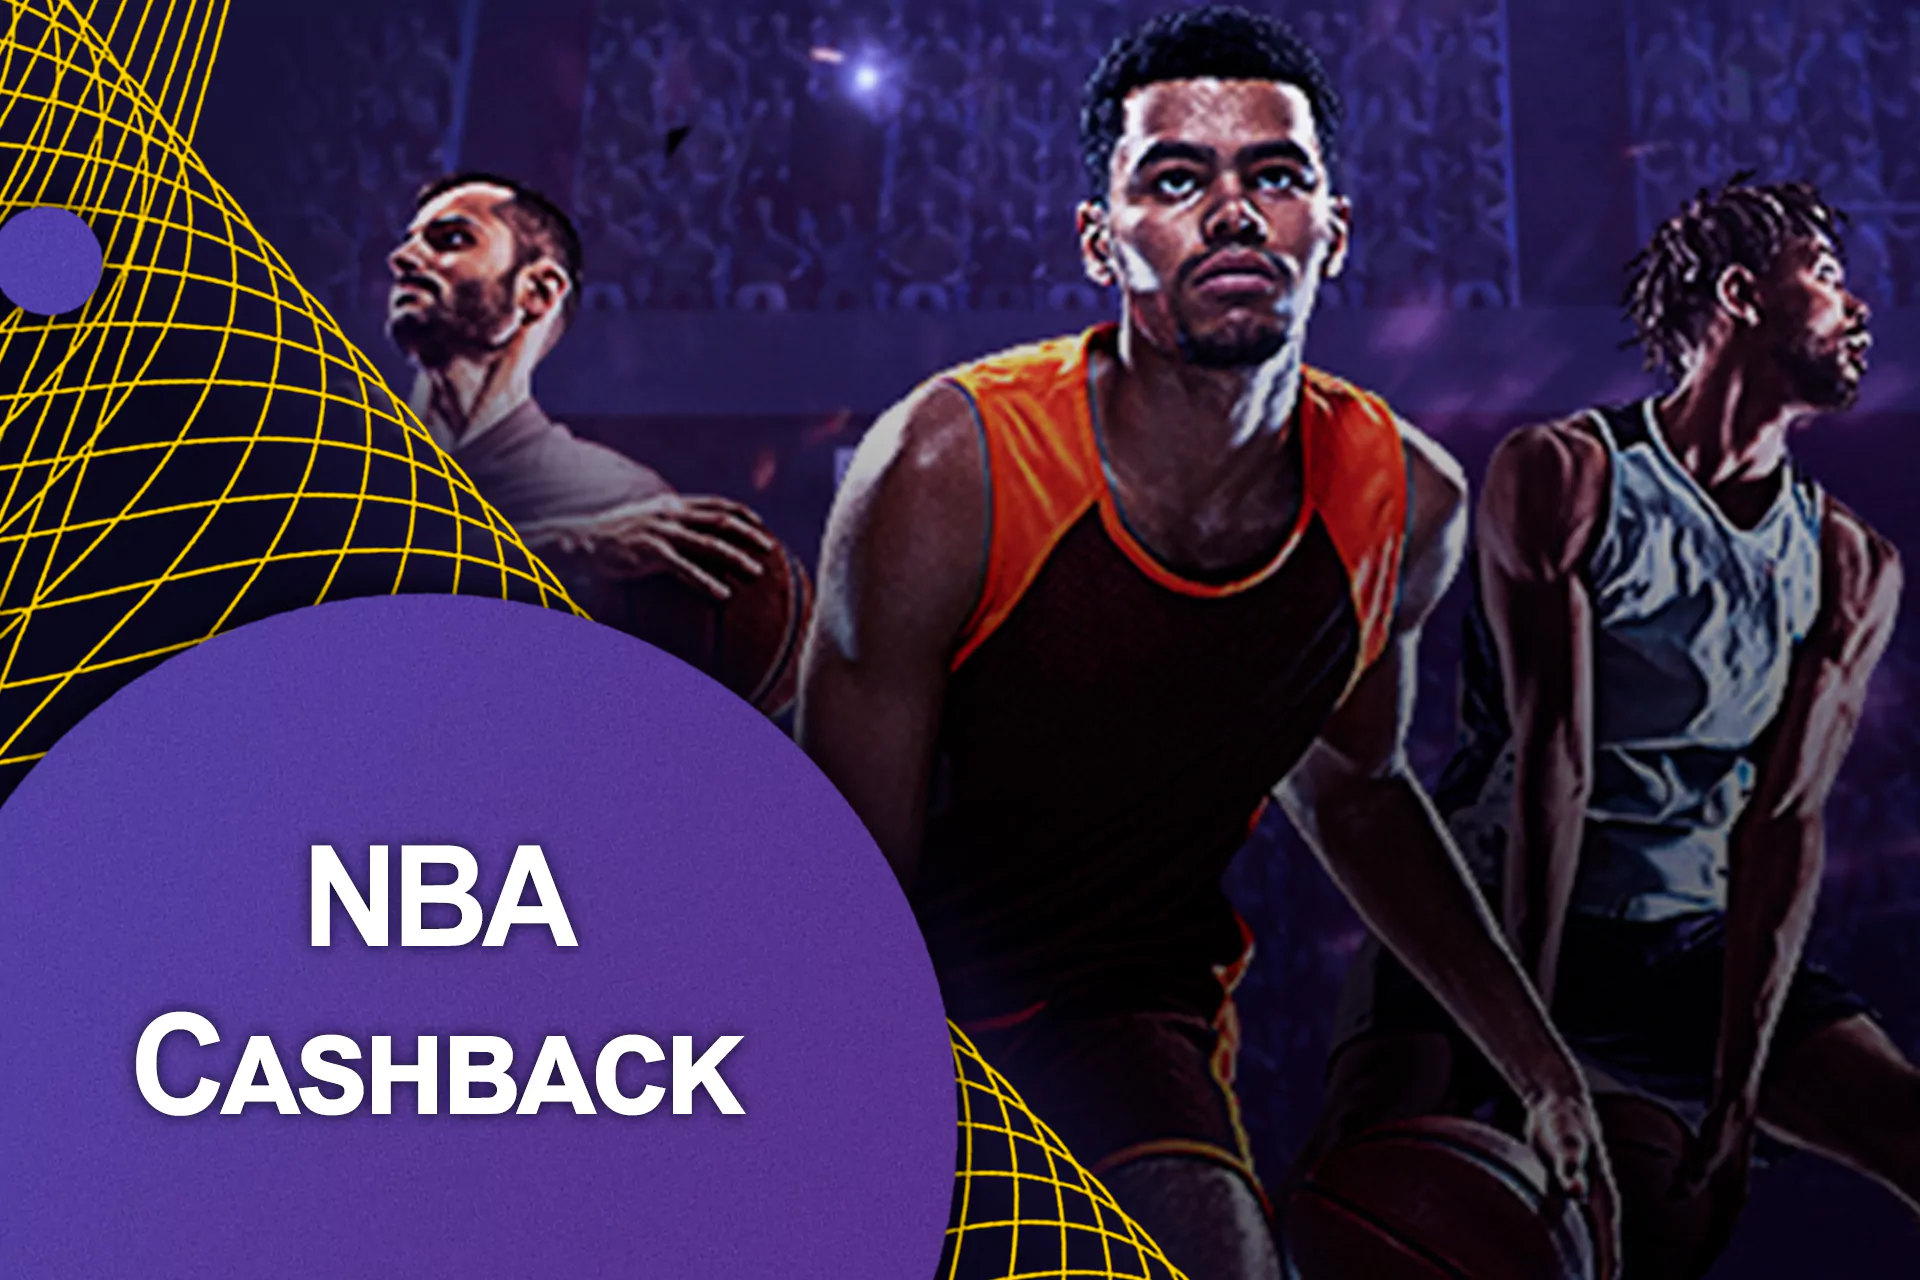 For basketball fans, there is the NBA cashback at Dafabet as well.